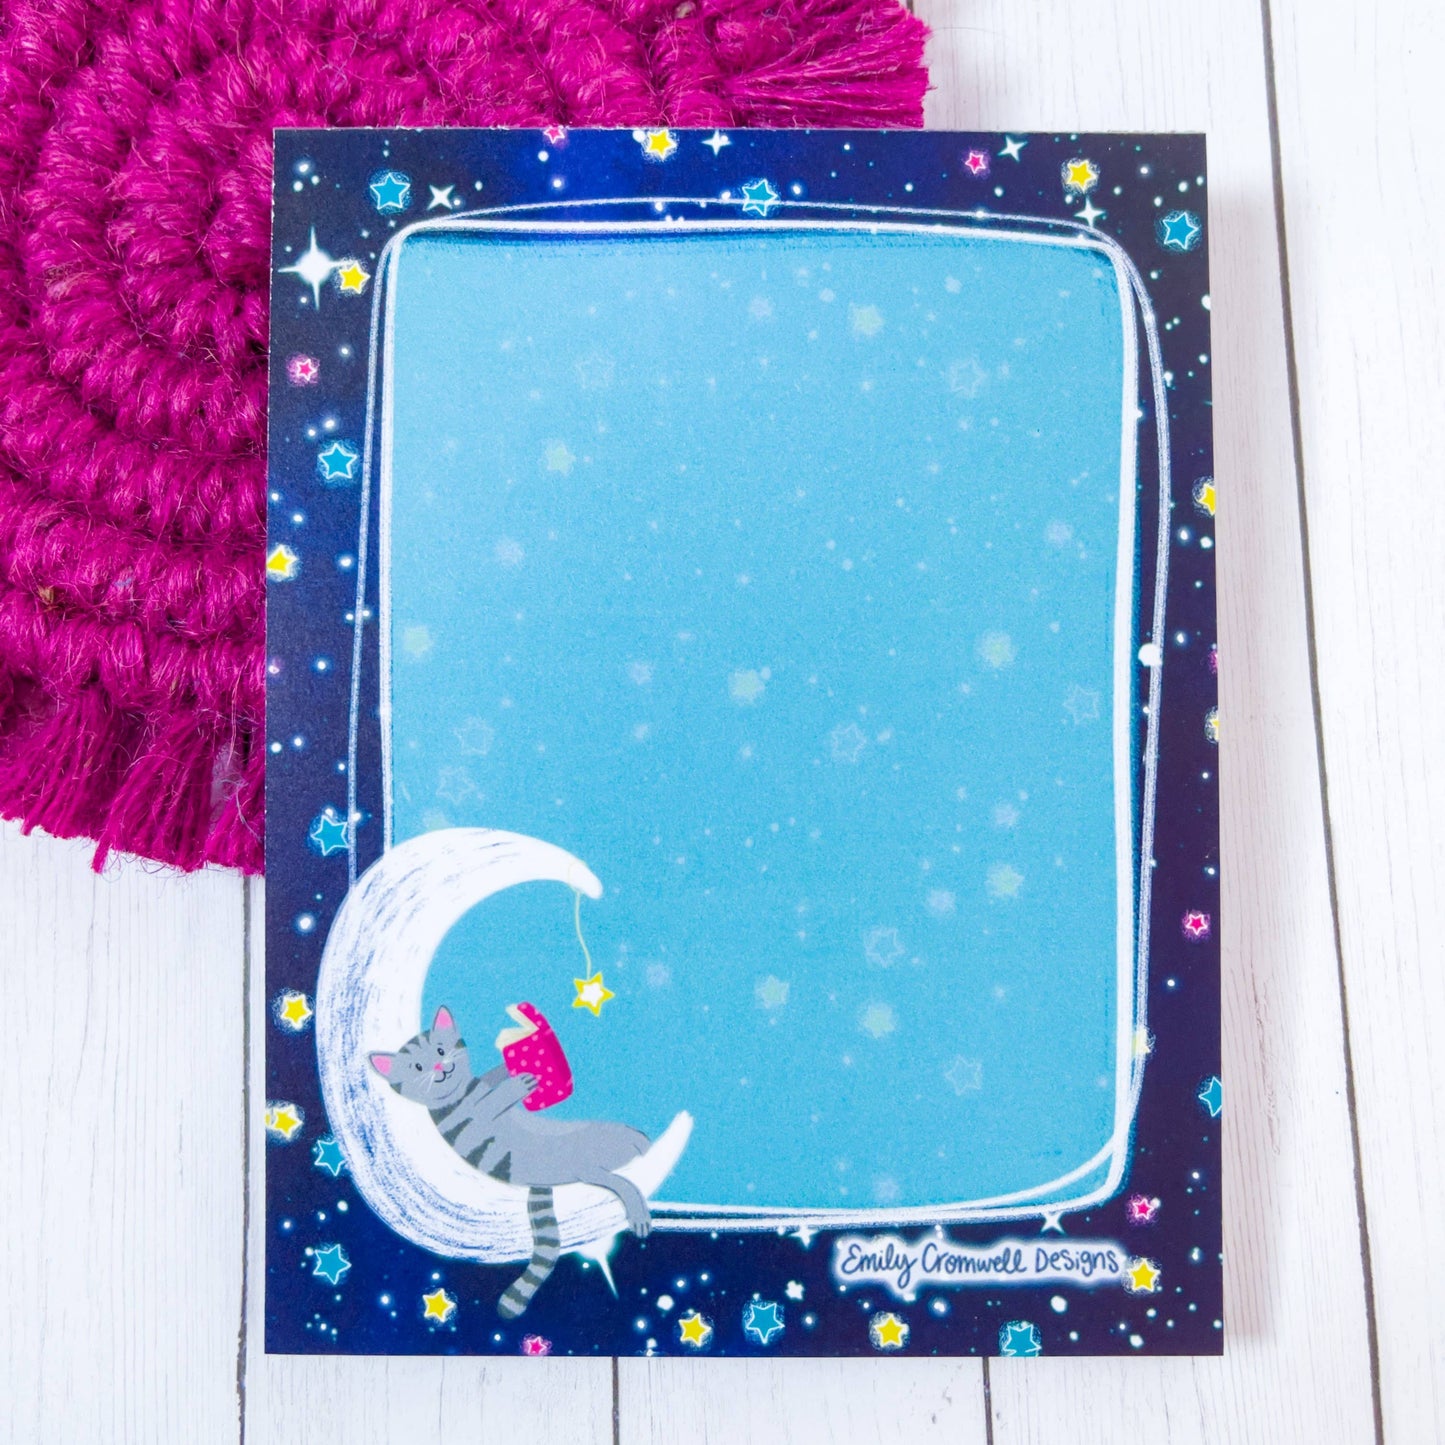 Emily Cromwell Designs - Kitty Reading on the Moon Charity Notepad 4.25" x 5.5"